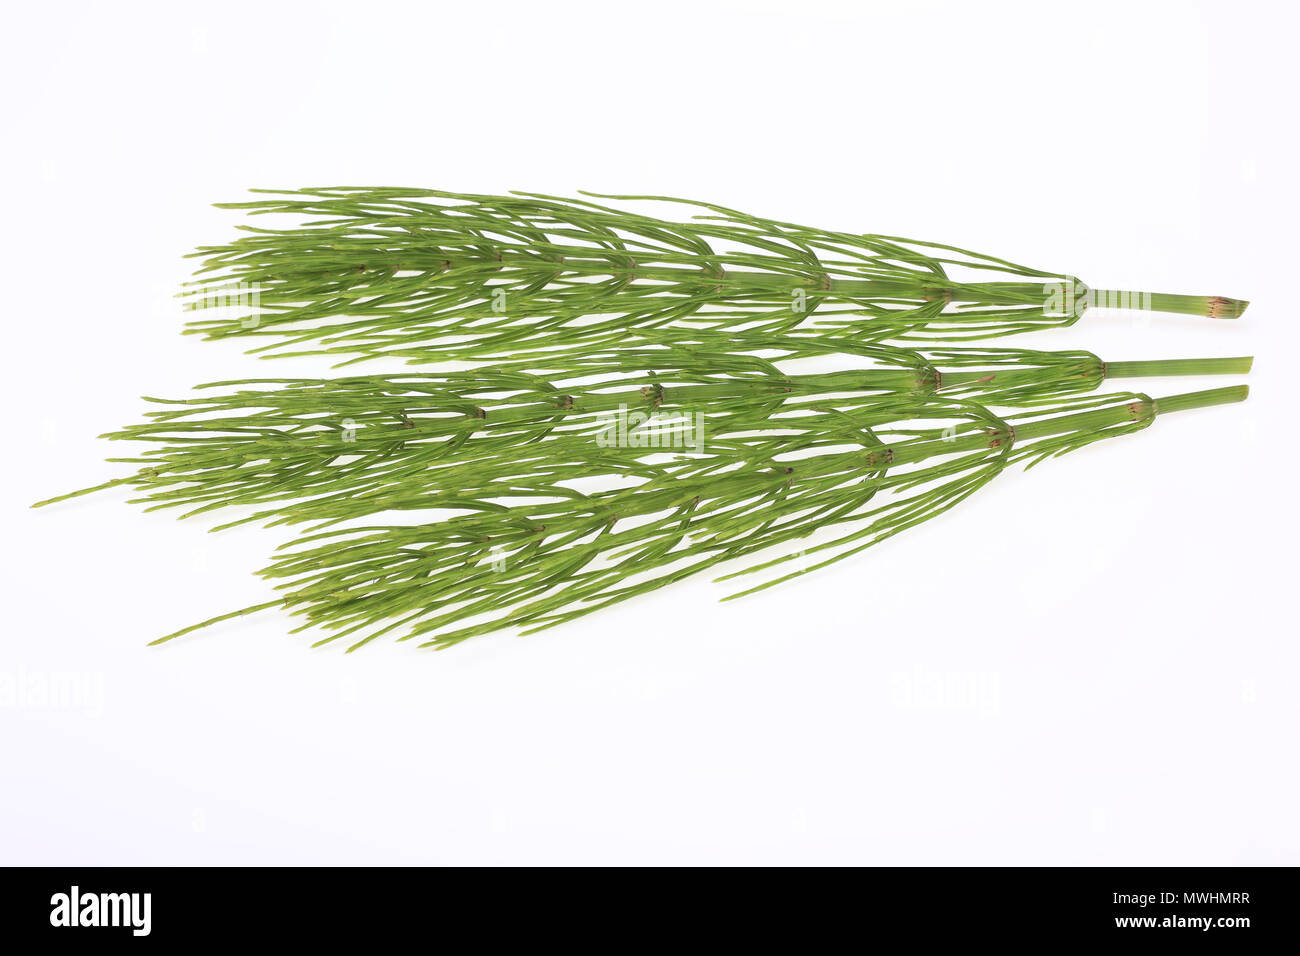 Medicinal plant, Equisetum arvense, the field horsetail or common horsetail Stock Photo